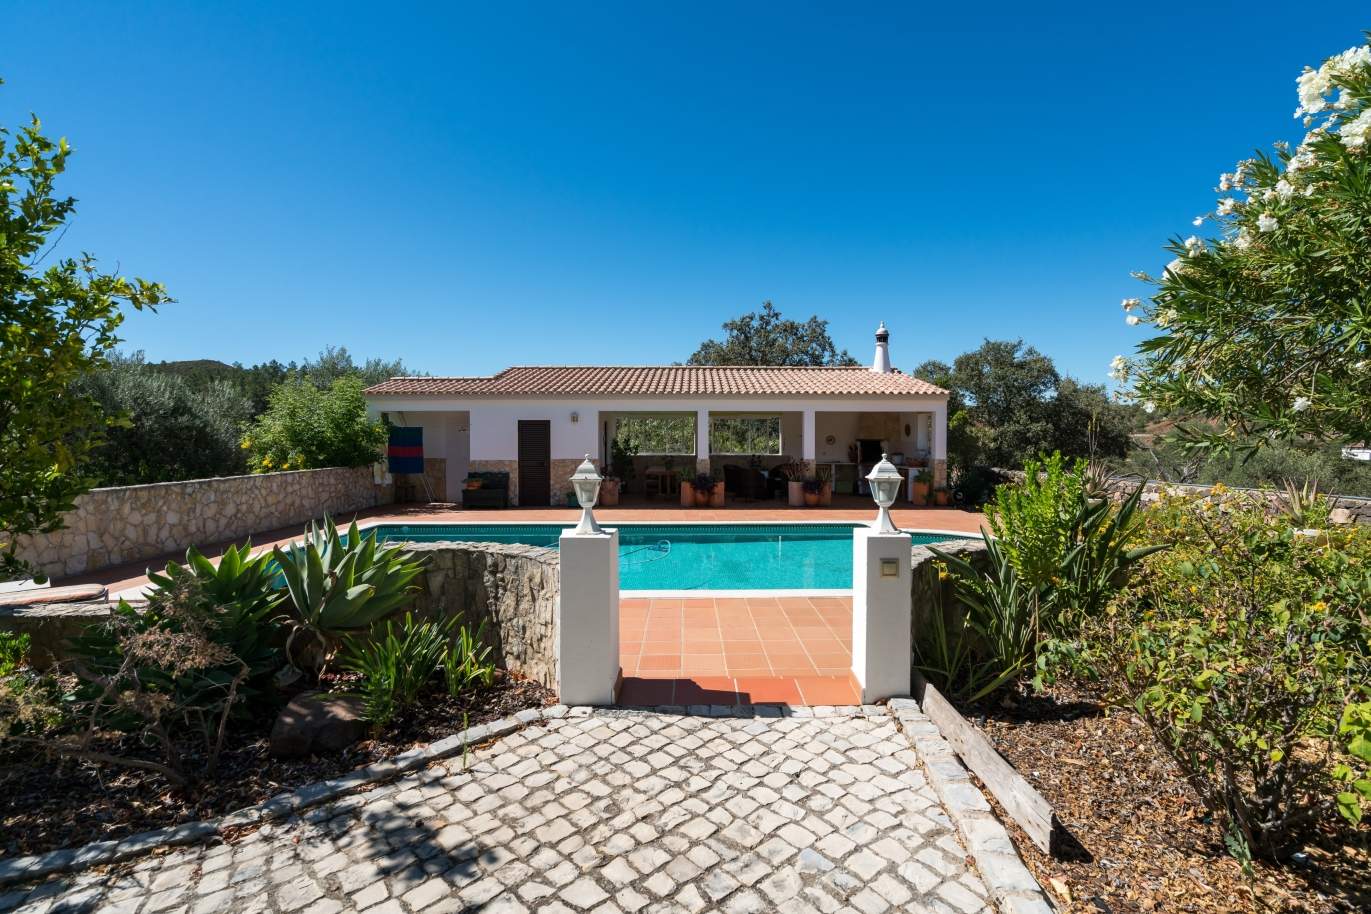 Villa with 3 bedrooms, with saltwater swimming pool, Querença, Loulé, Algarve_148464